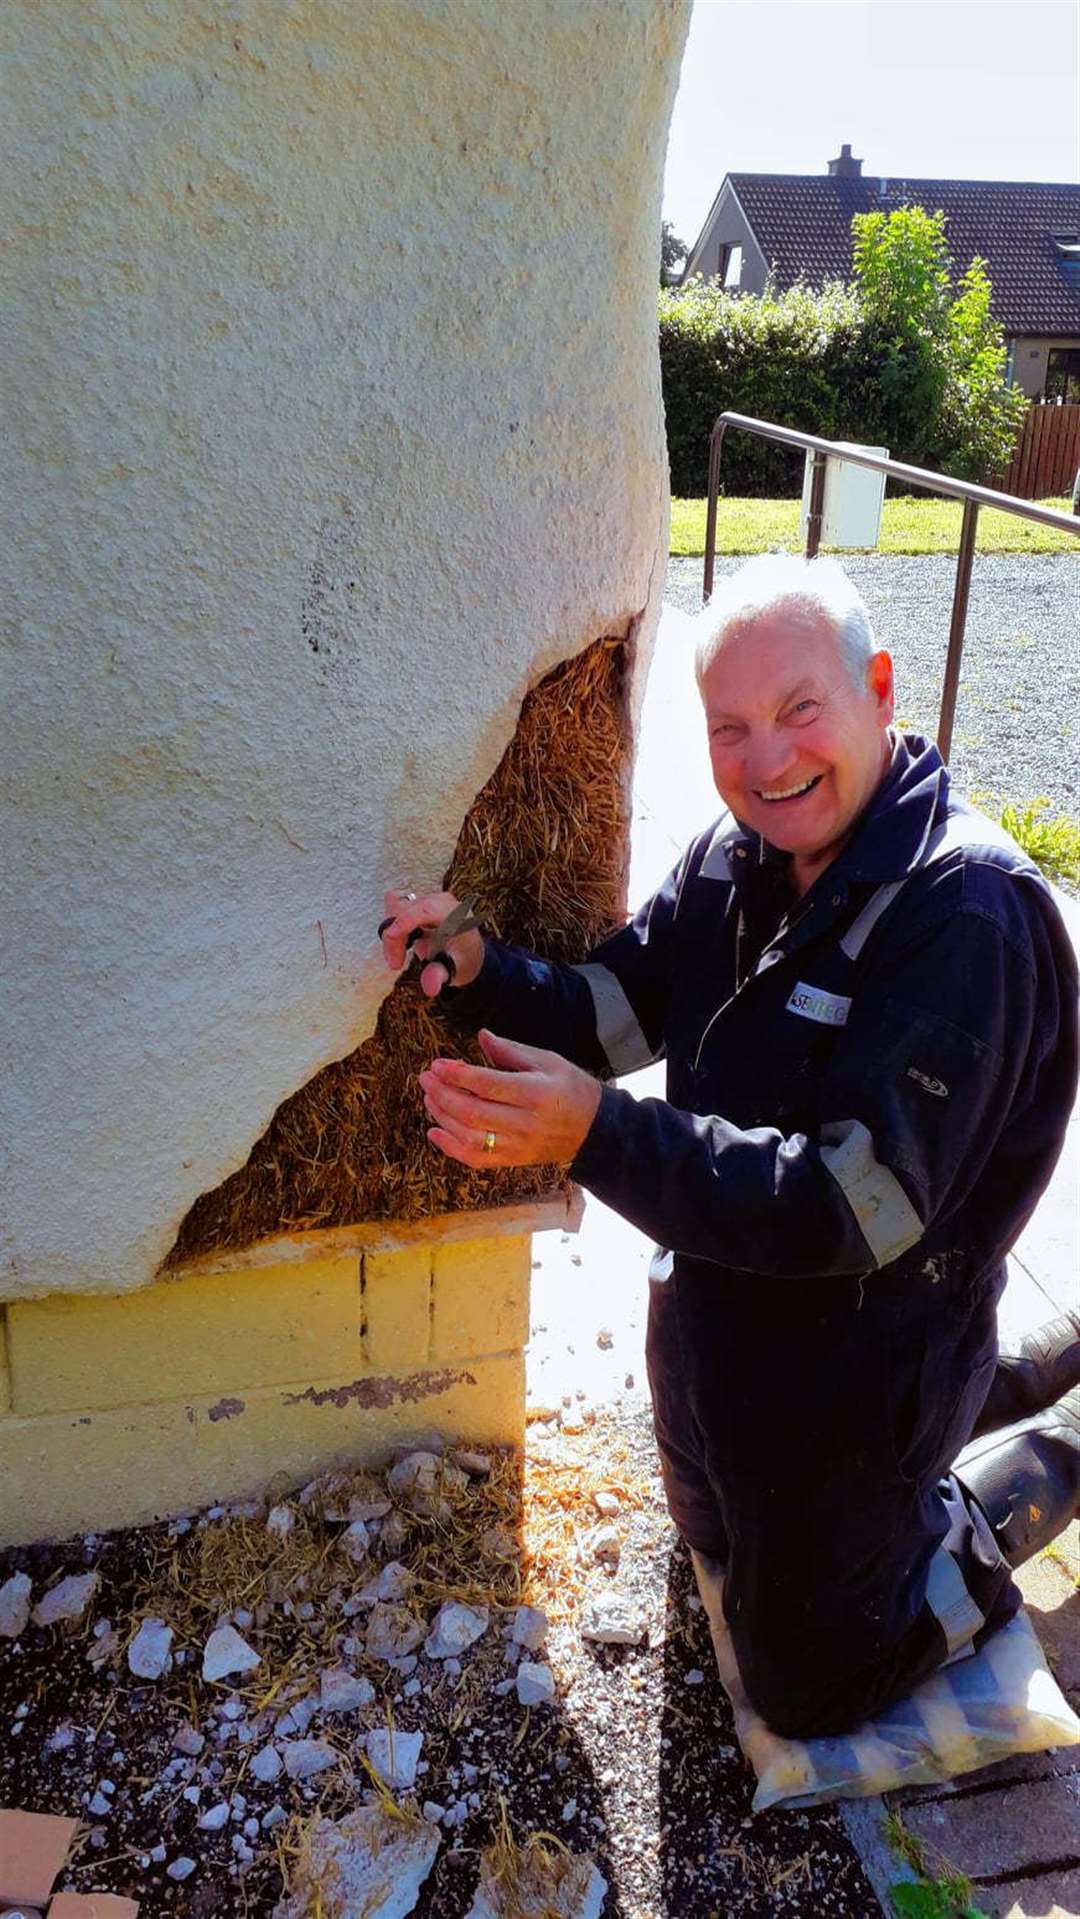 Brian Johnstone, Chairman of Action Kintore helping to repair the damage